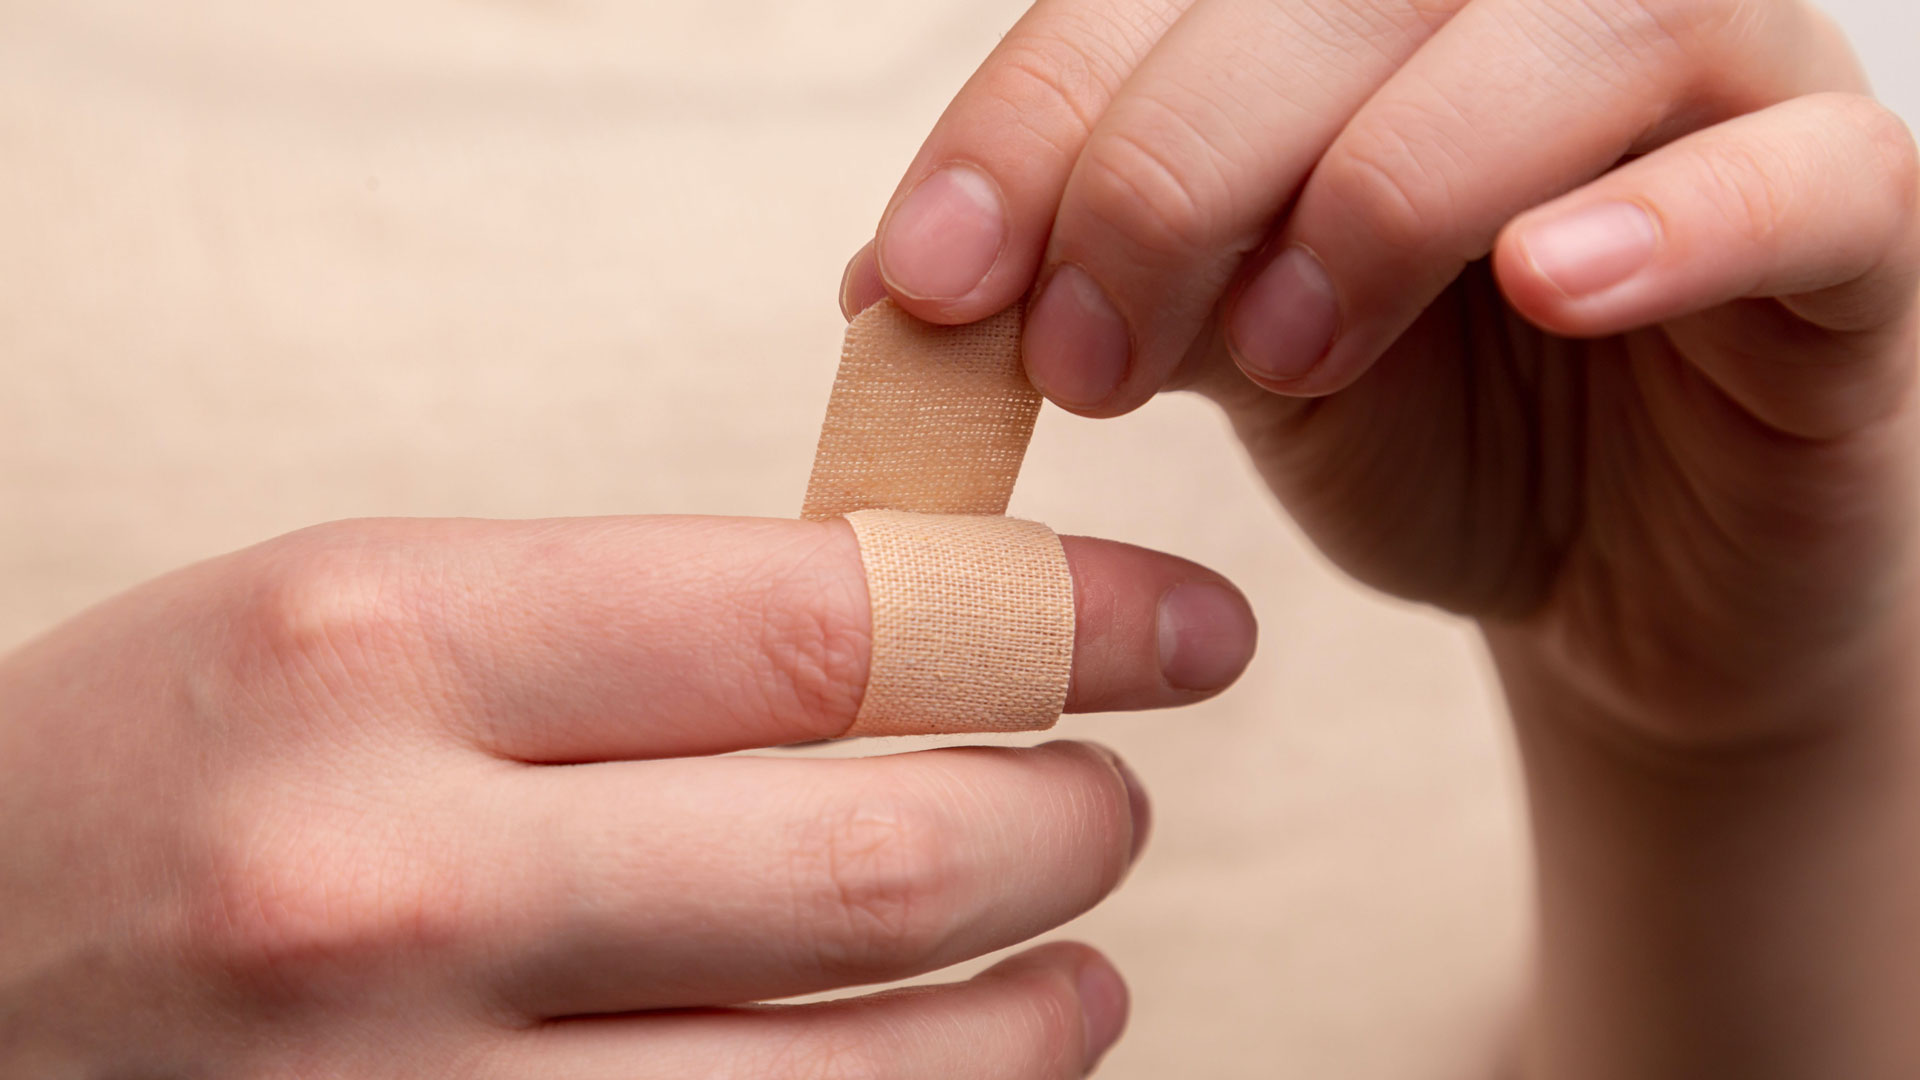 Preventing Burns, Cuts, or Other Injuries in Kitchen